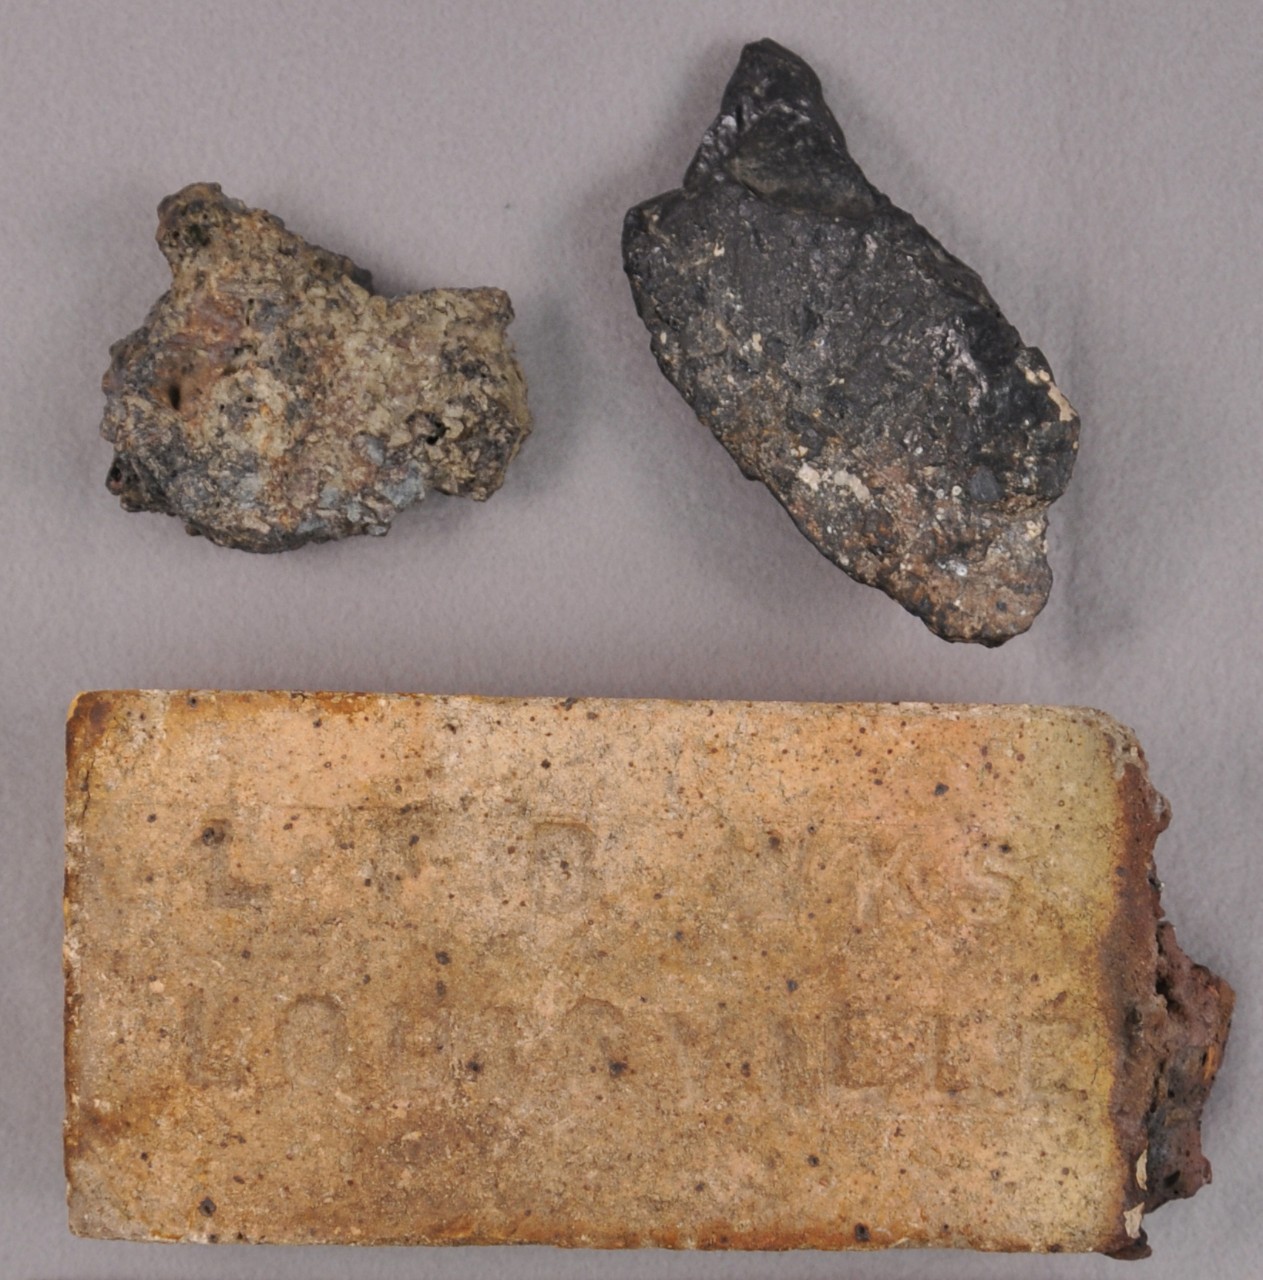 <p>At the top are two irregular shaped pieces of coal. Below the coal is a brick with the words “LFB WKS/LOUISVILLE” on the side that is shown in the picture. On the right corner of the brick is a piece of coal slag attached.</p>
